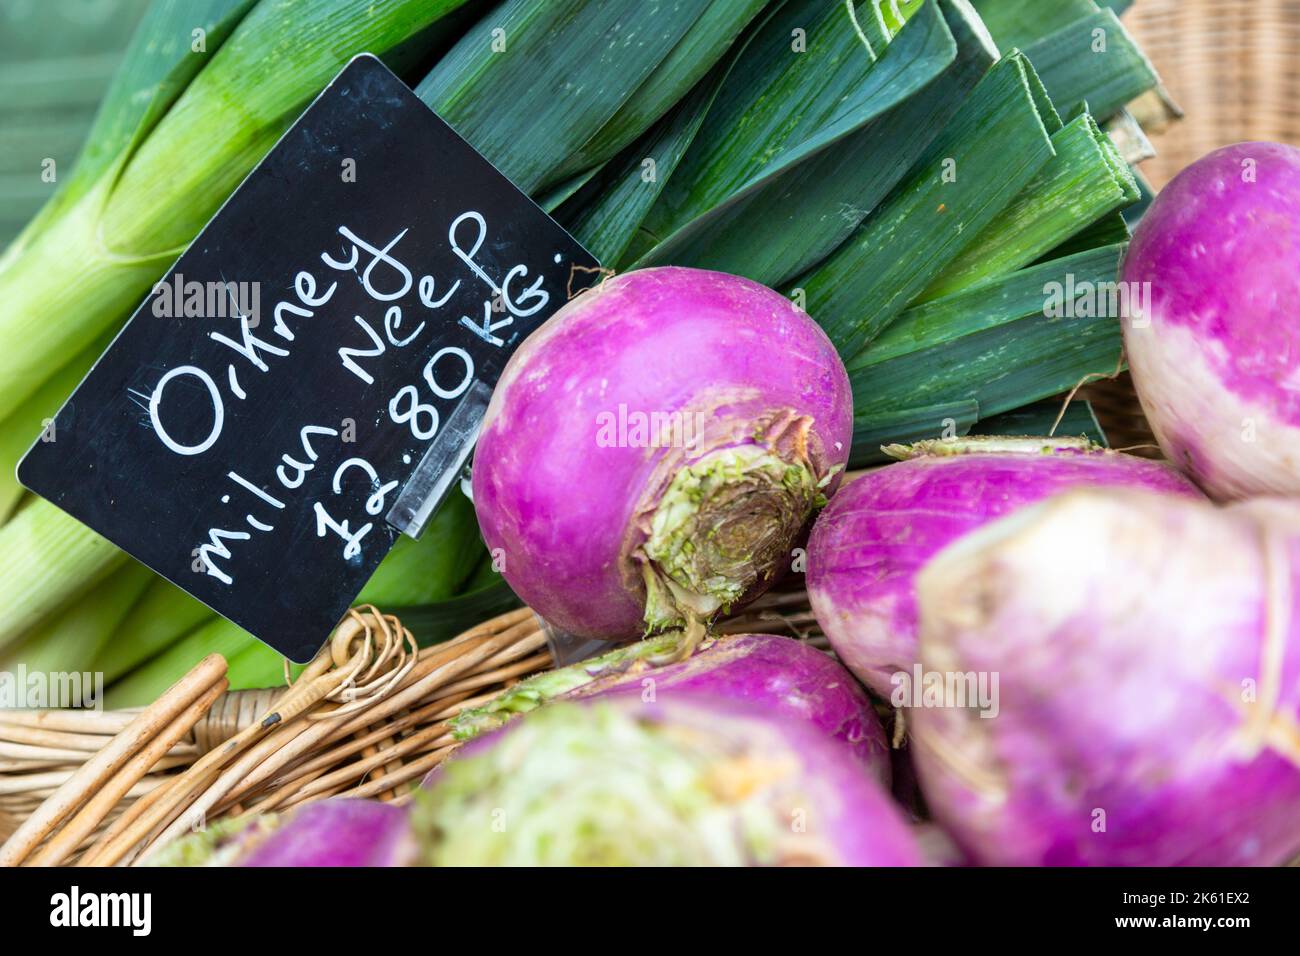 Orkney neeps and leeks on sale in a vegetable shop, close up Stock Photo